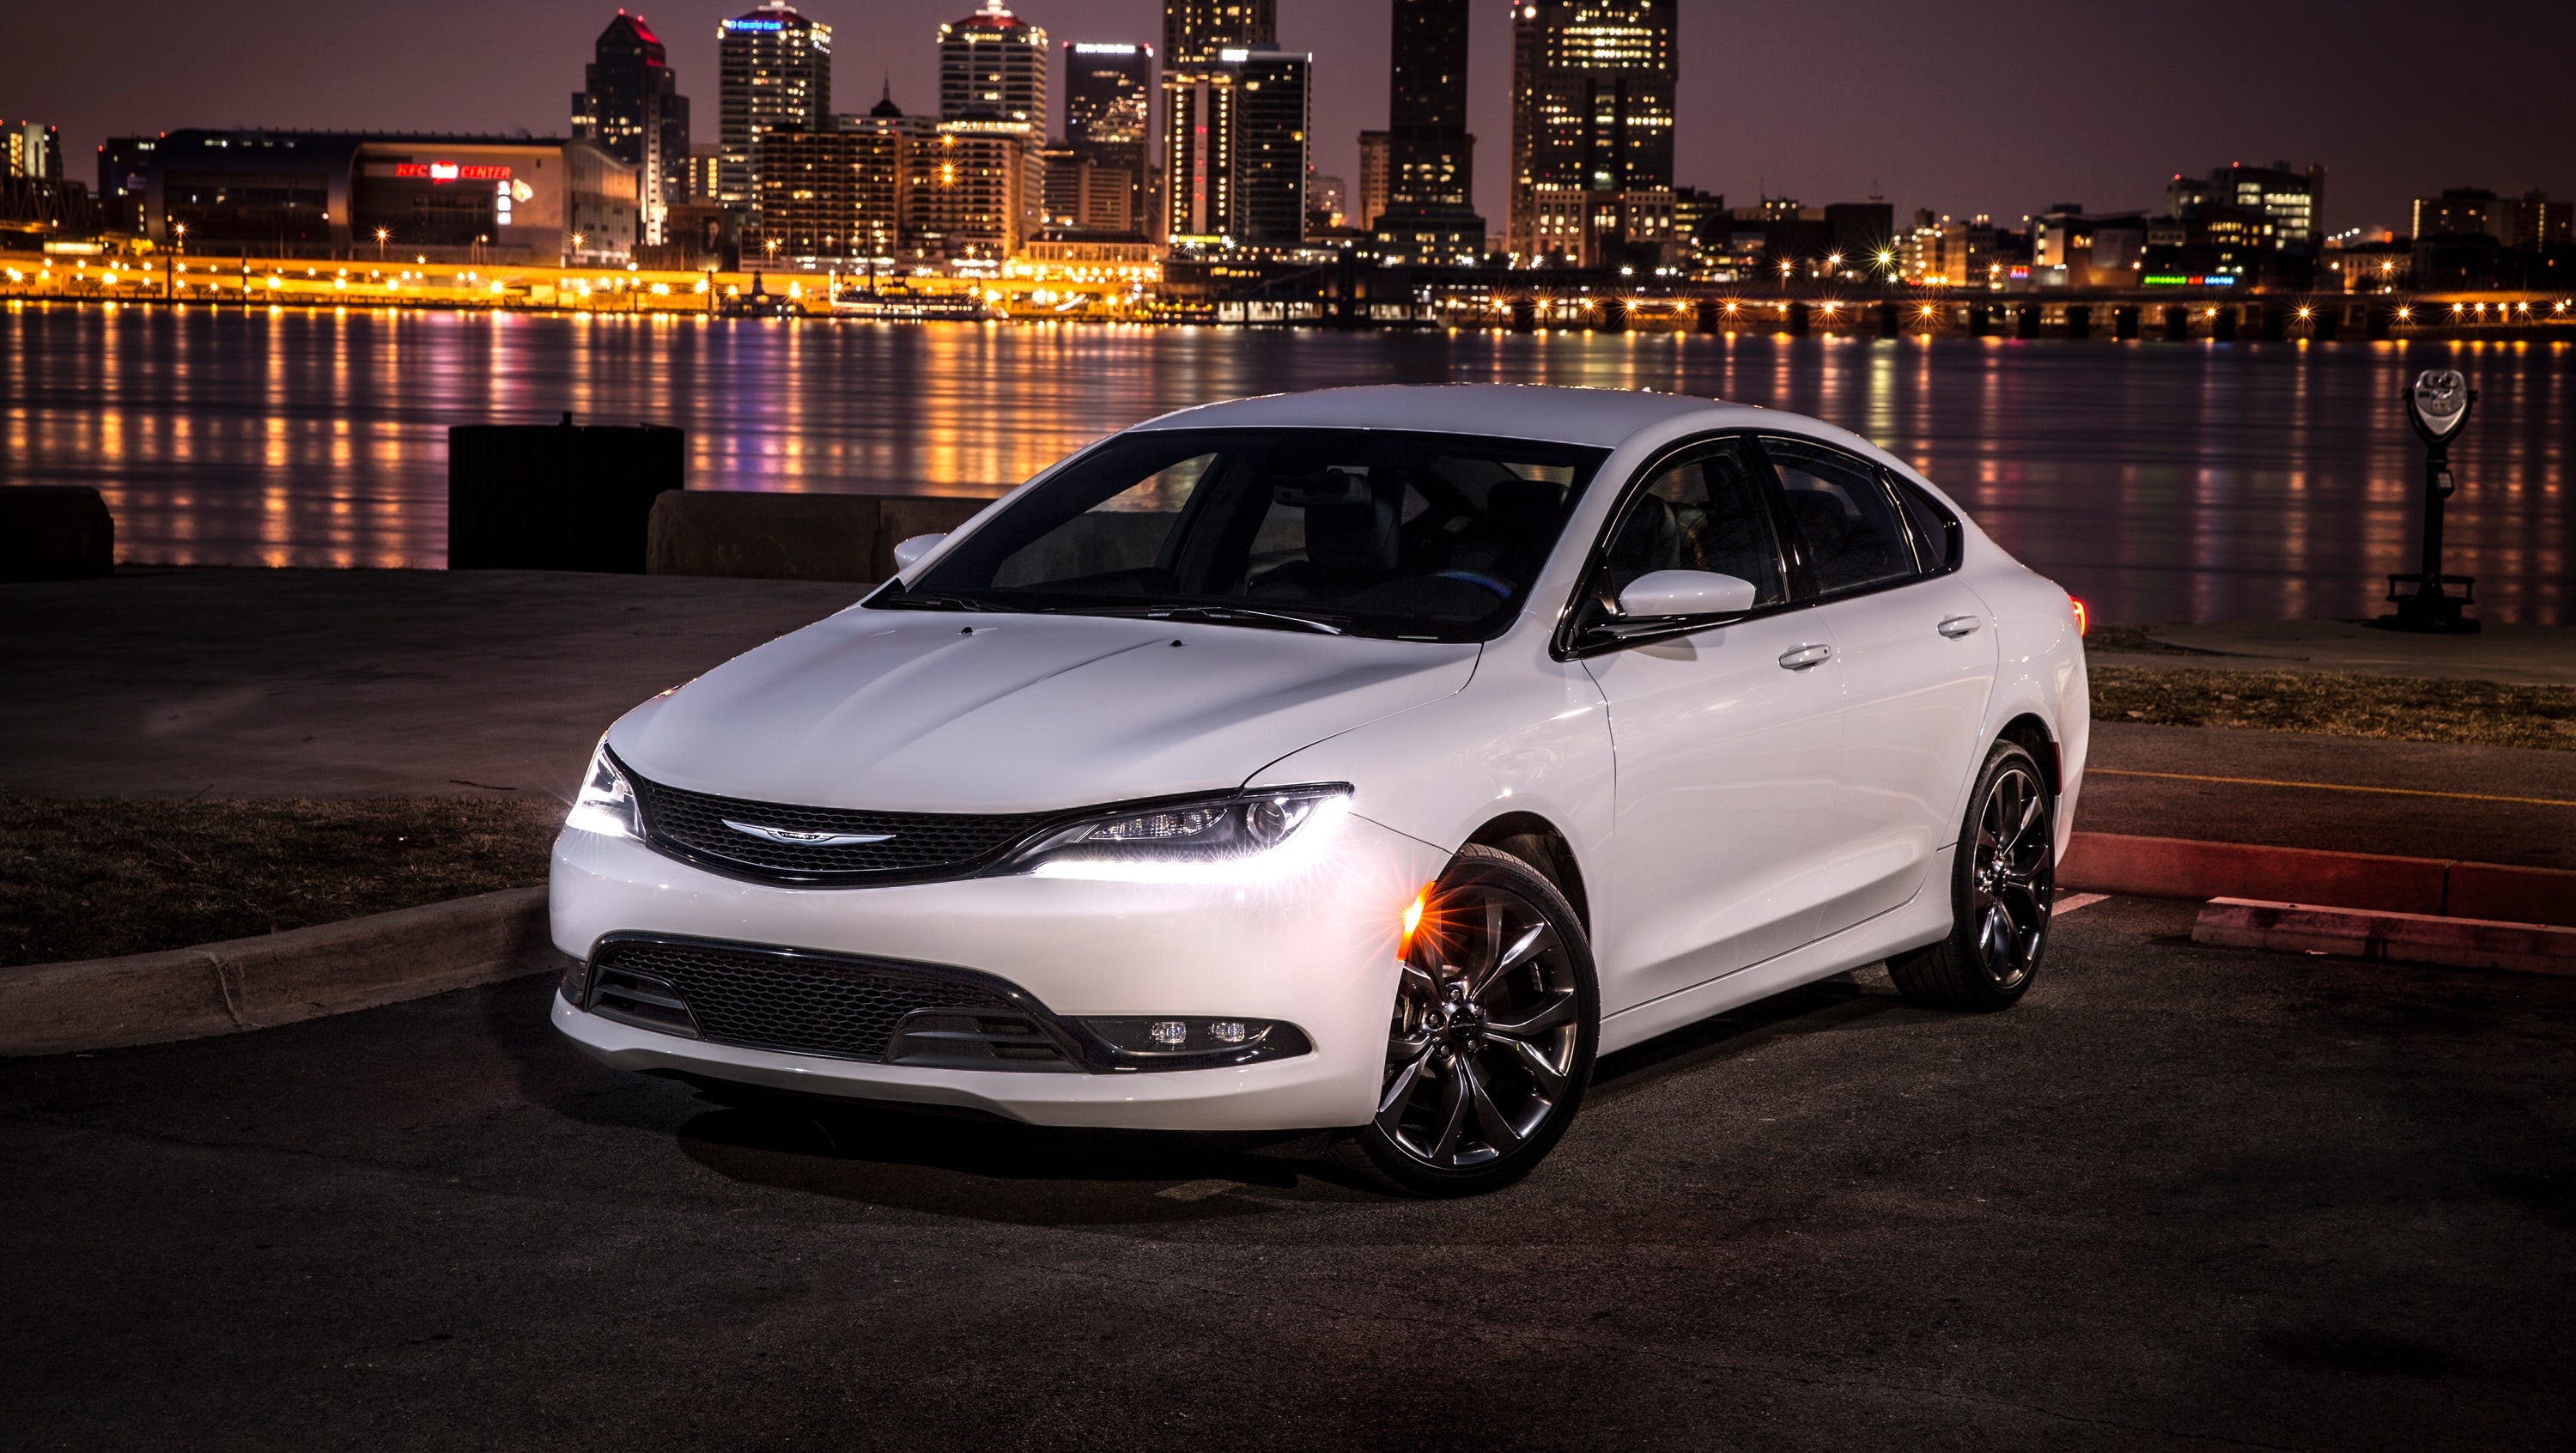 2015 Chrysler 200 remake sweetly disappointing